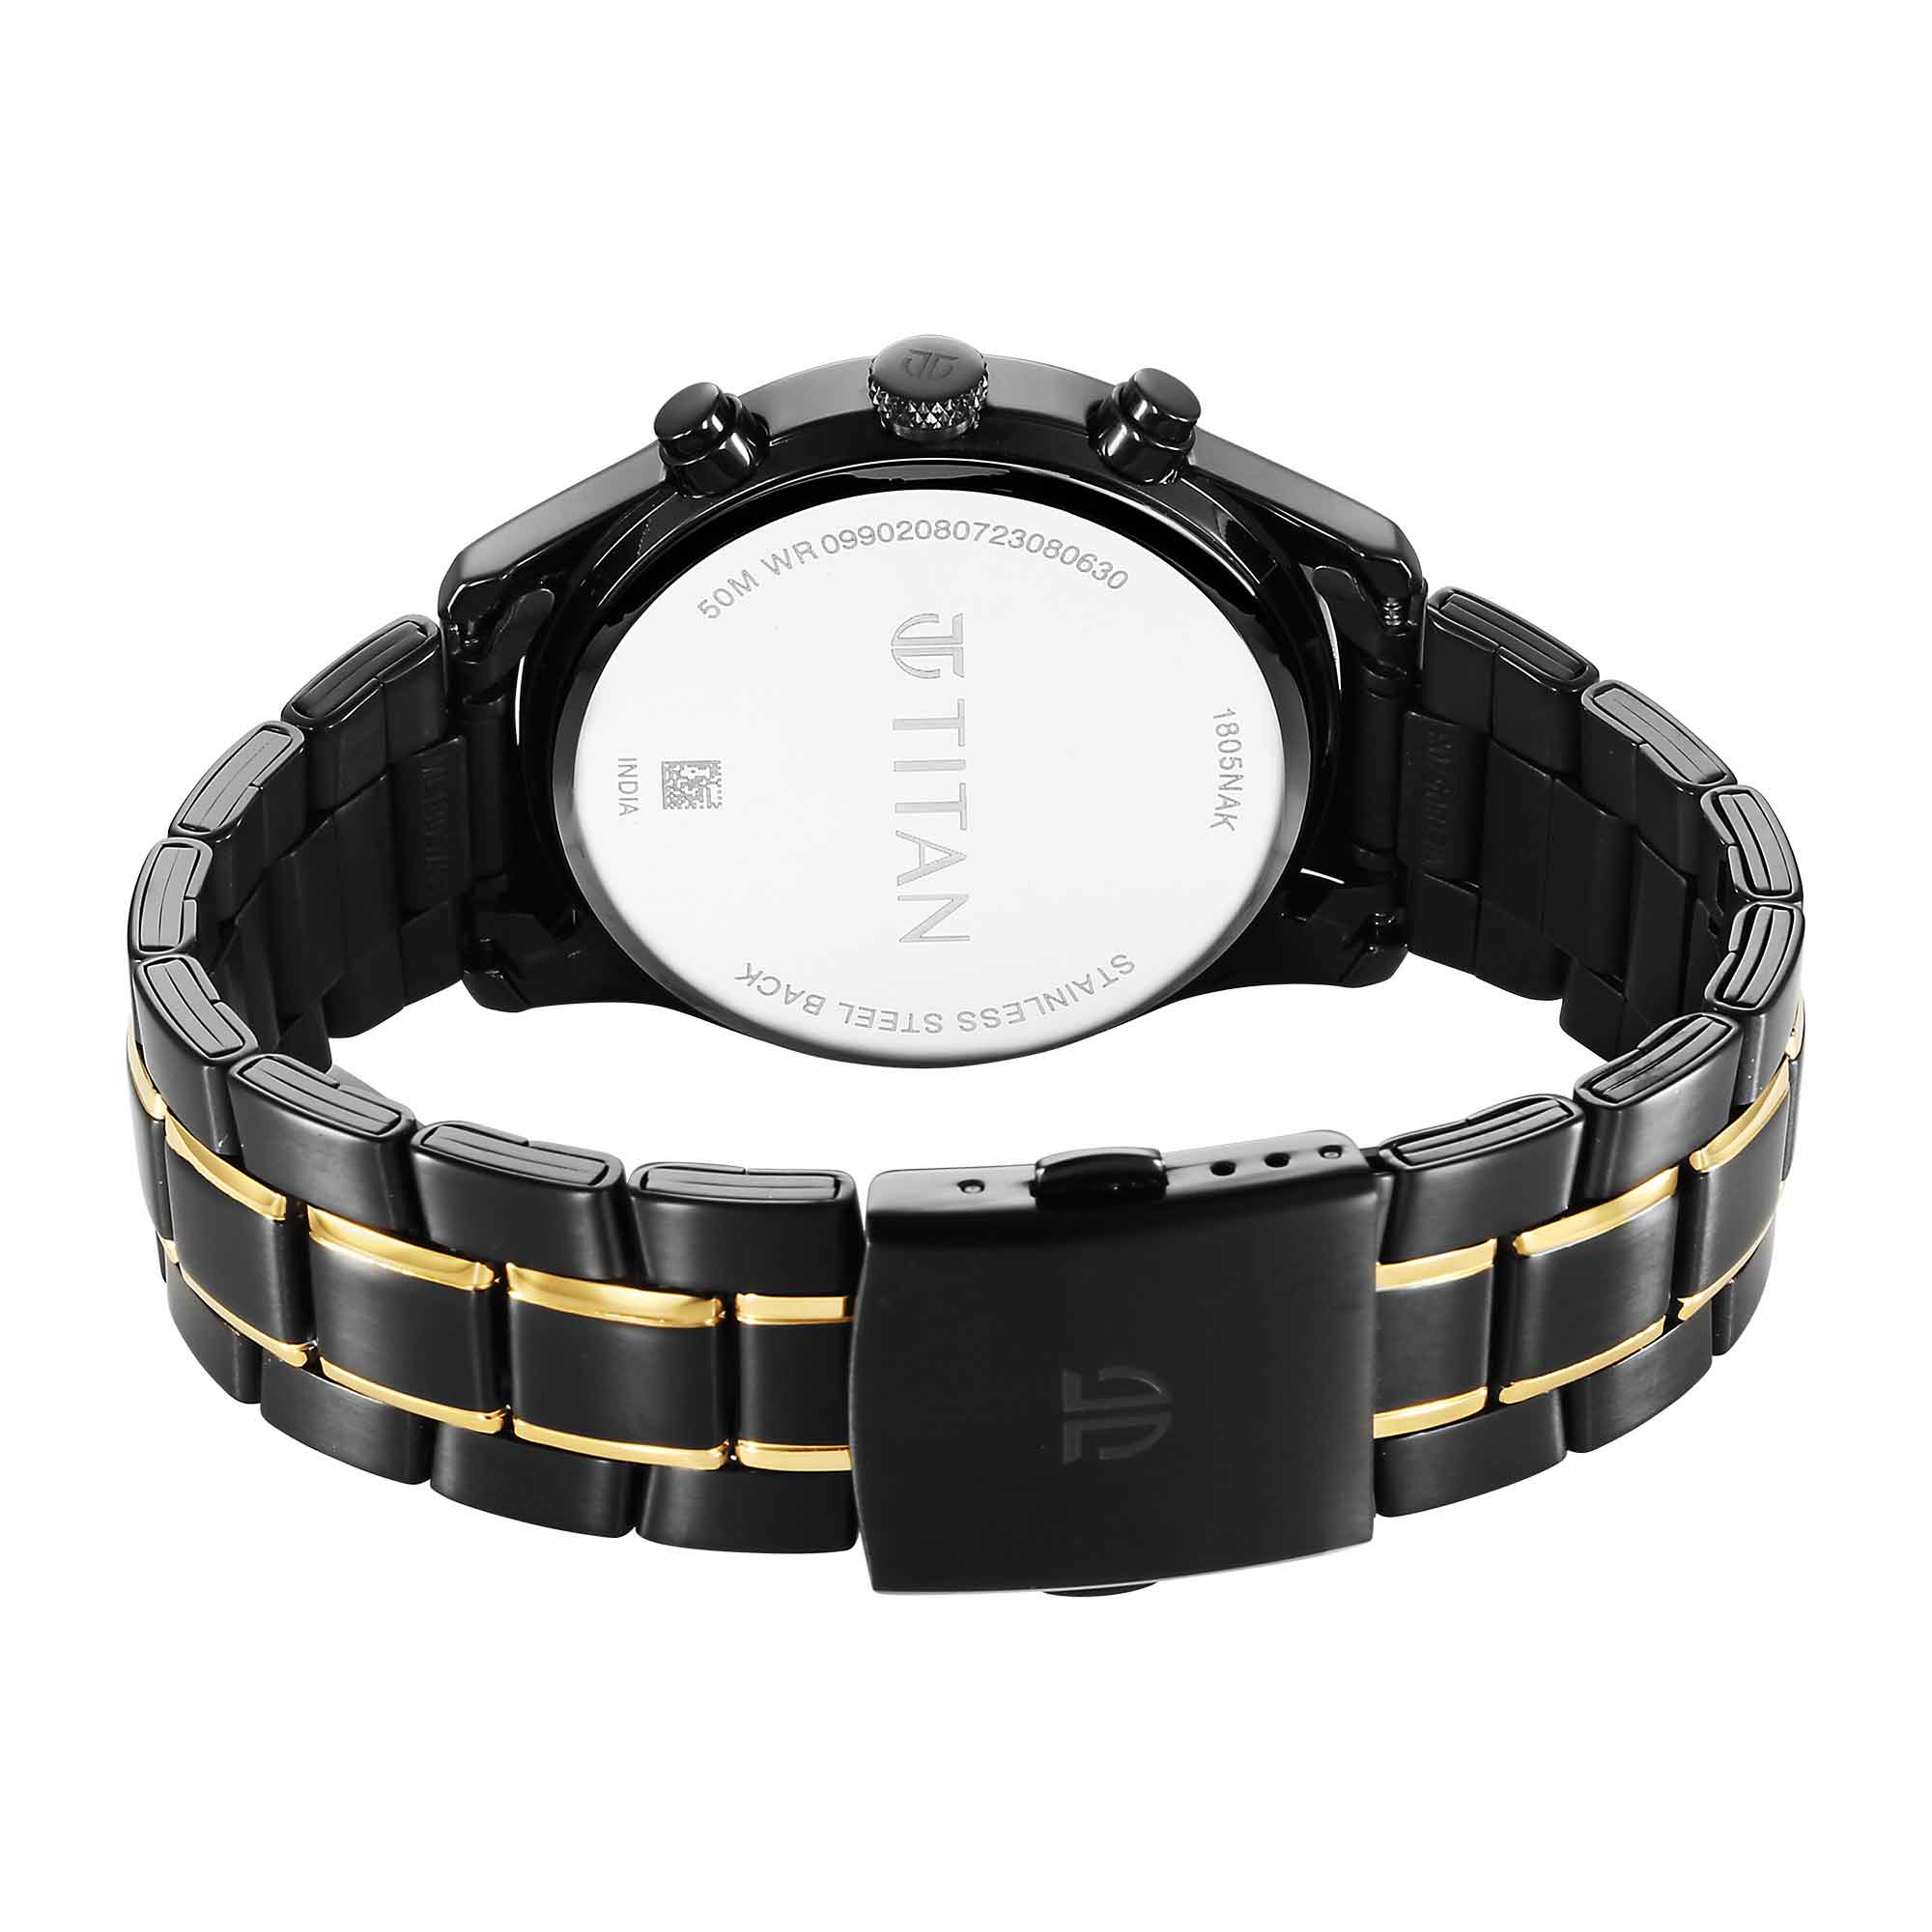 Titan Quartz Analog with Day and Date Black Dial Watch for Men